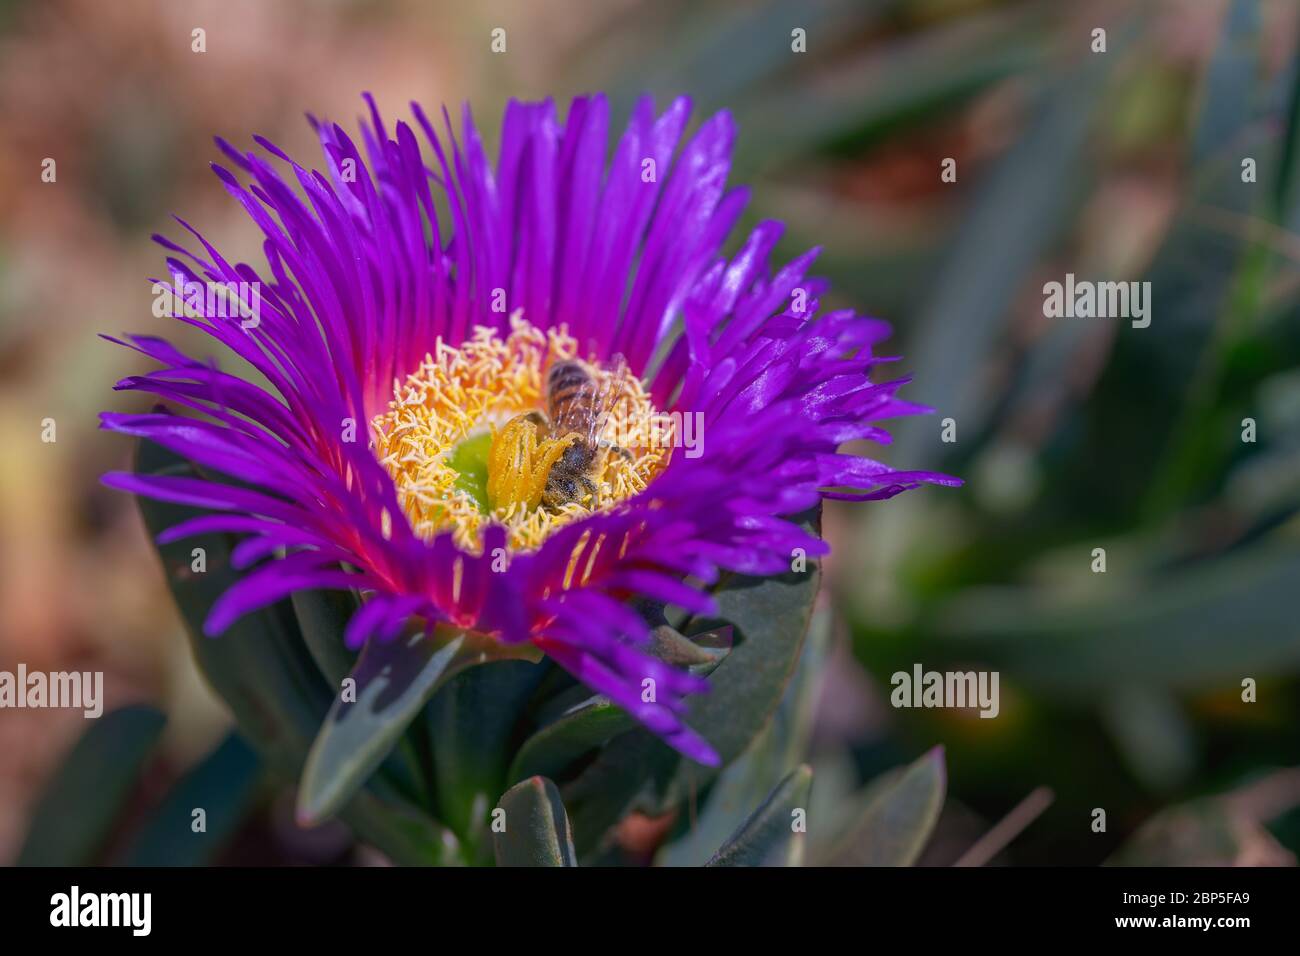 Bathing in pollen. Purple floser and bee close up.  Lampranthus spectabilis (Trailing Ice Plant) in bloom Stock Photo